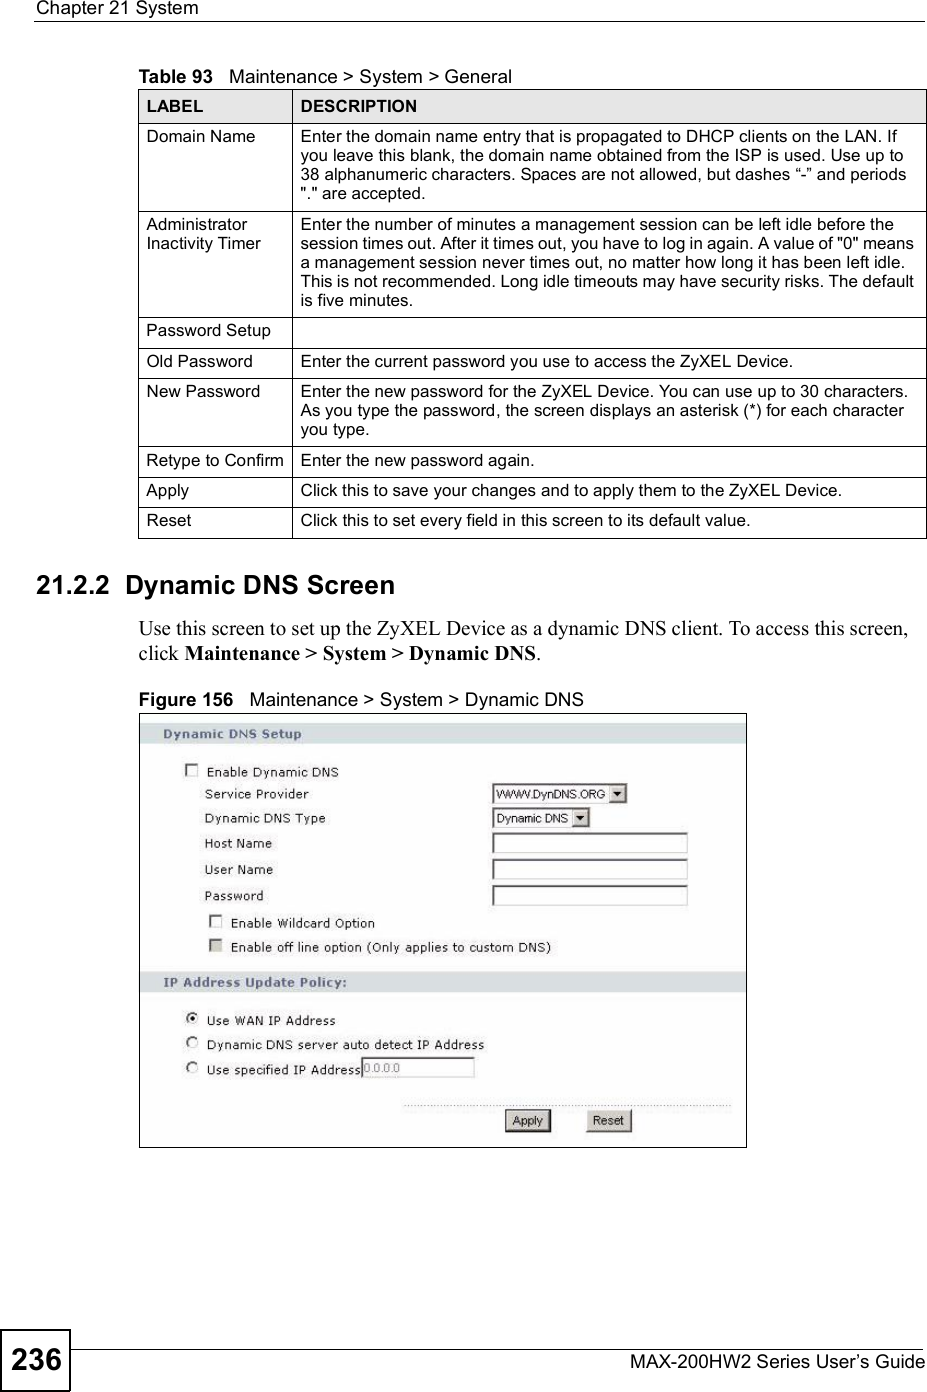 Chapter 21SystemMAX-200HW2 Series User s Guide23621.2.2  Dynamic DNS ScreenUse this screen to set up the ZyXEL Device as a dynamic DNS client. To access this screen, click Maintenance &gt; System &gt; Dynamic DNS.Figure 156   Maintenance &gt; System &gt; Dynamic DNSDomain NameEnter the domain name entry that is propagated to DHCP clients on the LAN. If you leave this blank, the domain name obtained from the ISP is used. Use up to 38 alphanumeric characters. Spaces are not allowed, but dashes !-&quot; and periods &quot;.&quot; are accepted.Administrator Inactivity TimerEnter the number of minutes a management session can be left idle before the session times out. After it times out, you have to log in again. A value of &quot;0&quot; means a management session never times out, no matter how long it has been left idle. This is not recommended. Long idle timeouts may have security risks. The default is five minutes. Password SetupOld PasswordEnter the current password you use to access the ZyXEL Device.New PasswordEnter the new password for the ZyXEL Device. You can use up to 30 characters. As you type the password, the screen displays an asterisk (*) for each character you type.Retype to ConfirmEnter the new password again.Apply Click this to save your changes and to apply them to the ZyXEL Device.Reset Click this to set every field in this screen to its default value.Table 93   Maintenance &gt; System &gt; GeneralLABEL DESCRIPTION